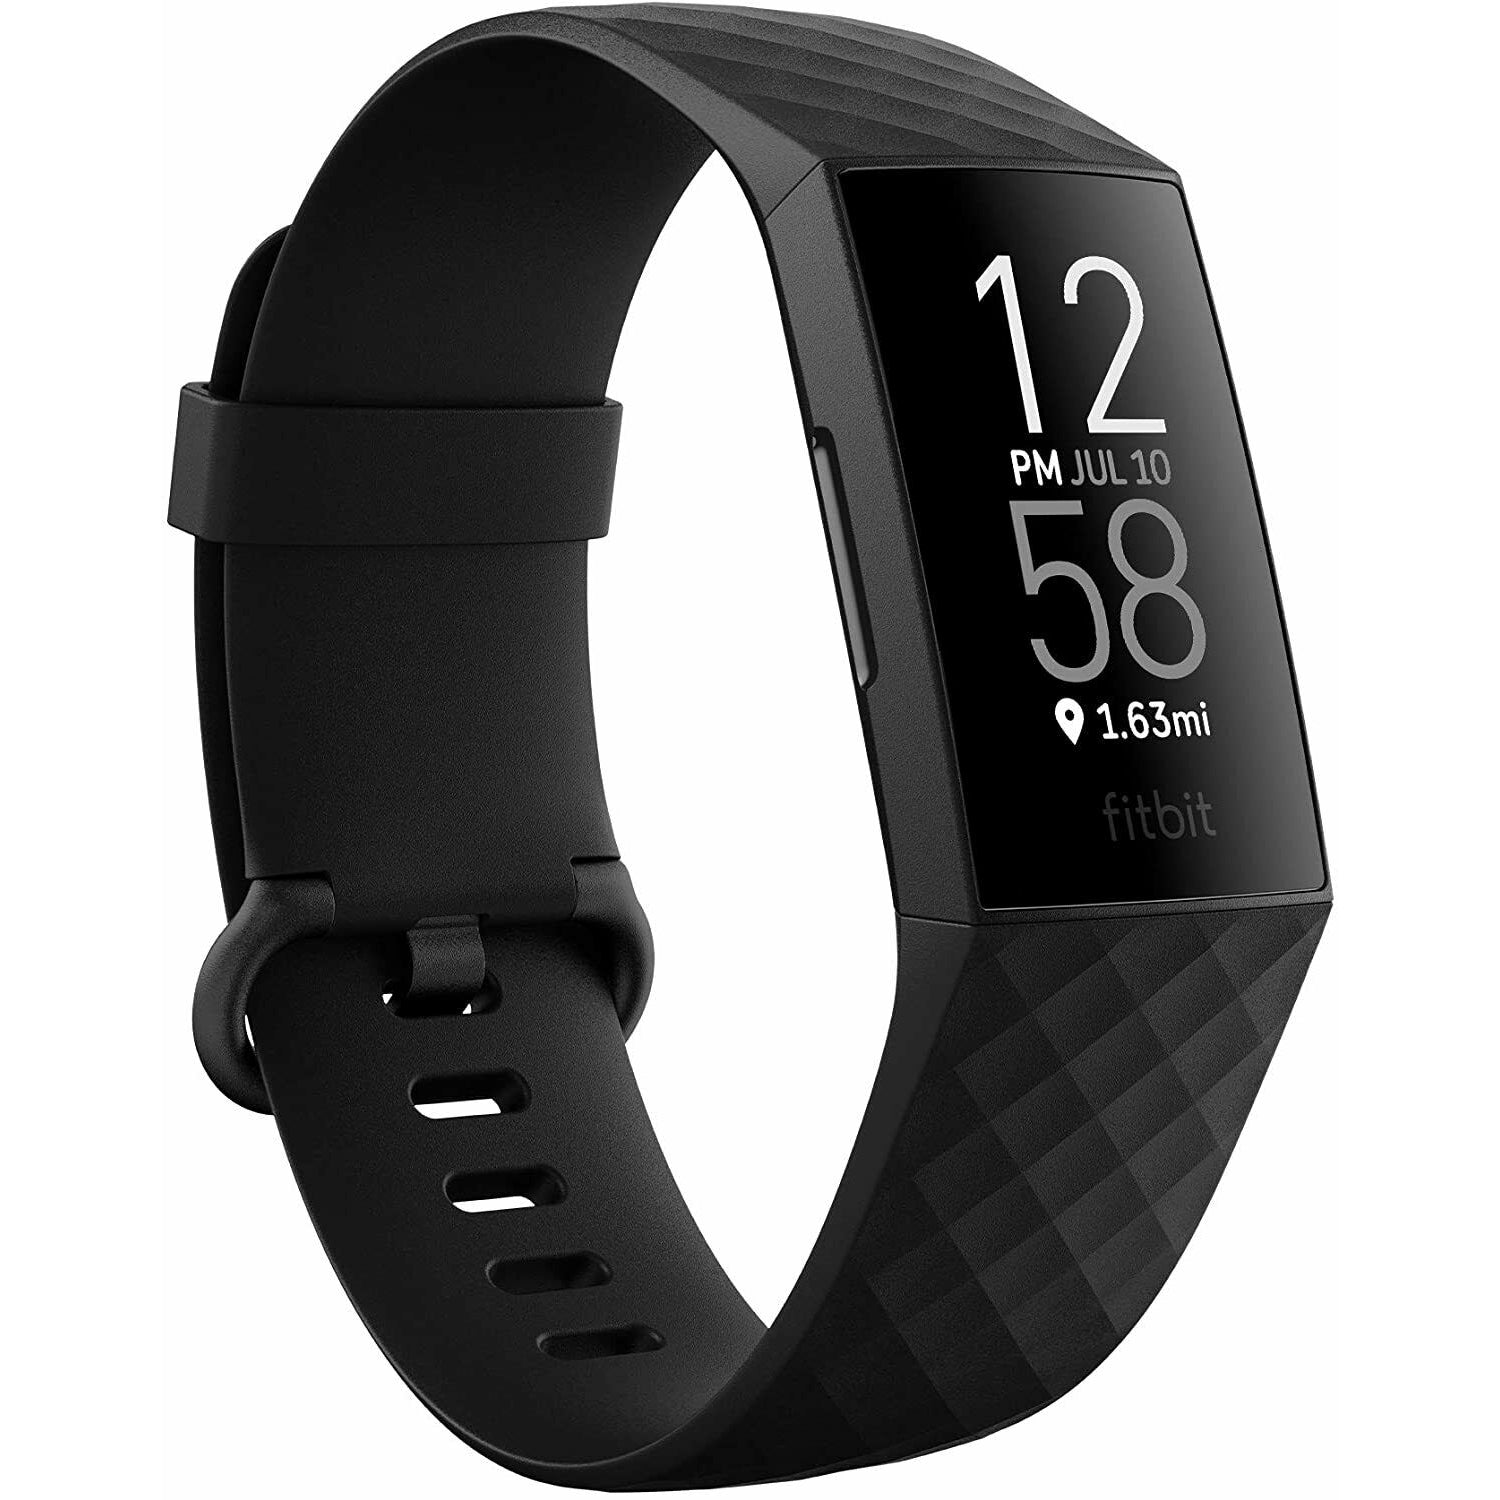 Fitbit Charge 4 Advanced Fitness Tracker with GPS - Black - Refurbished Excellent